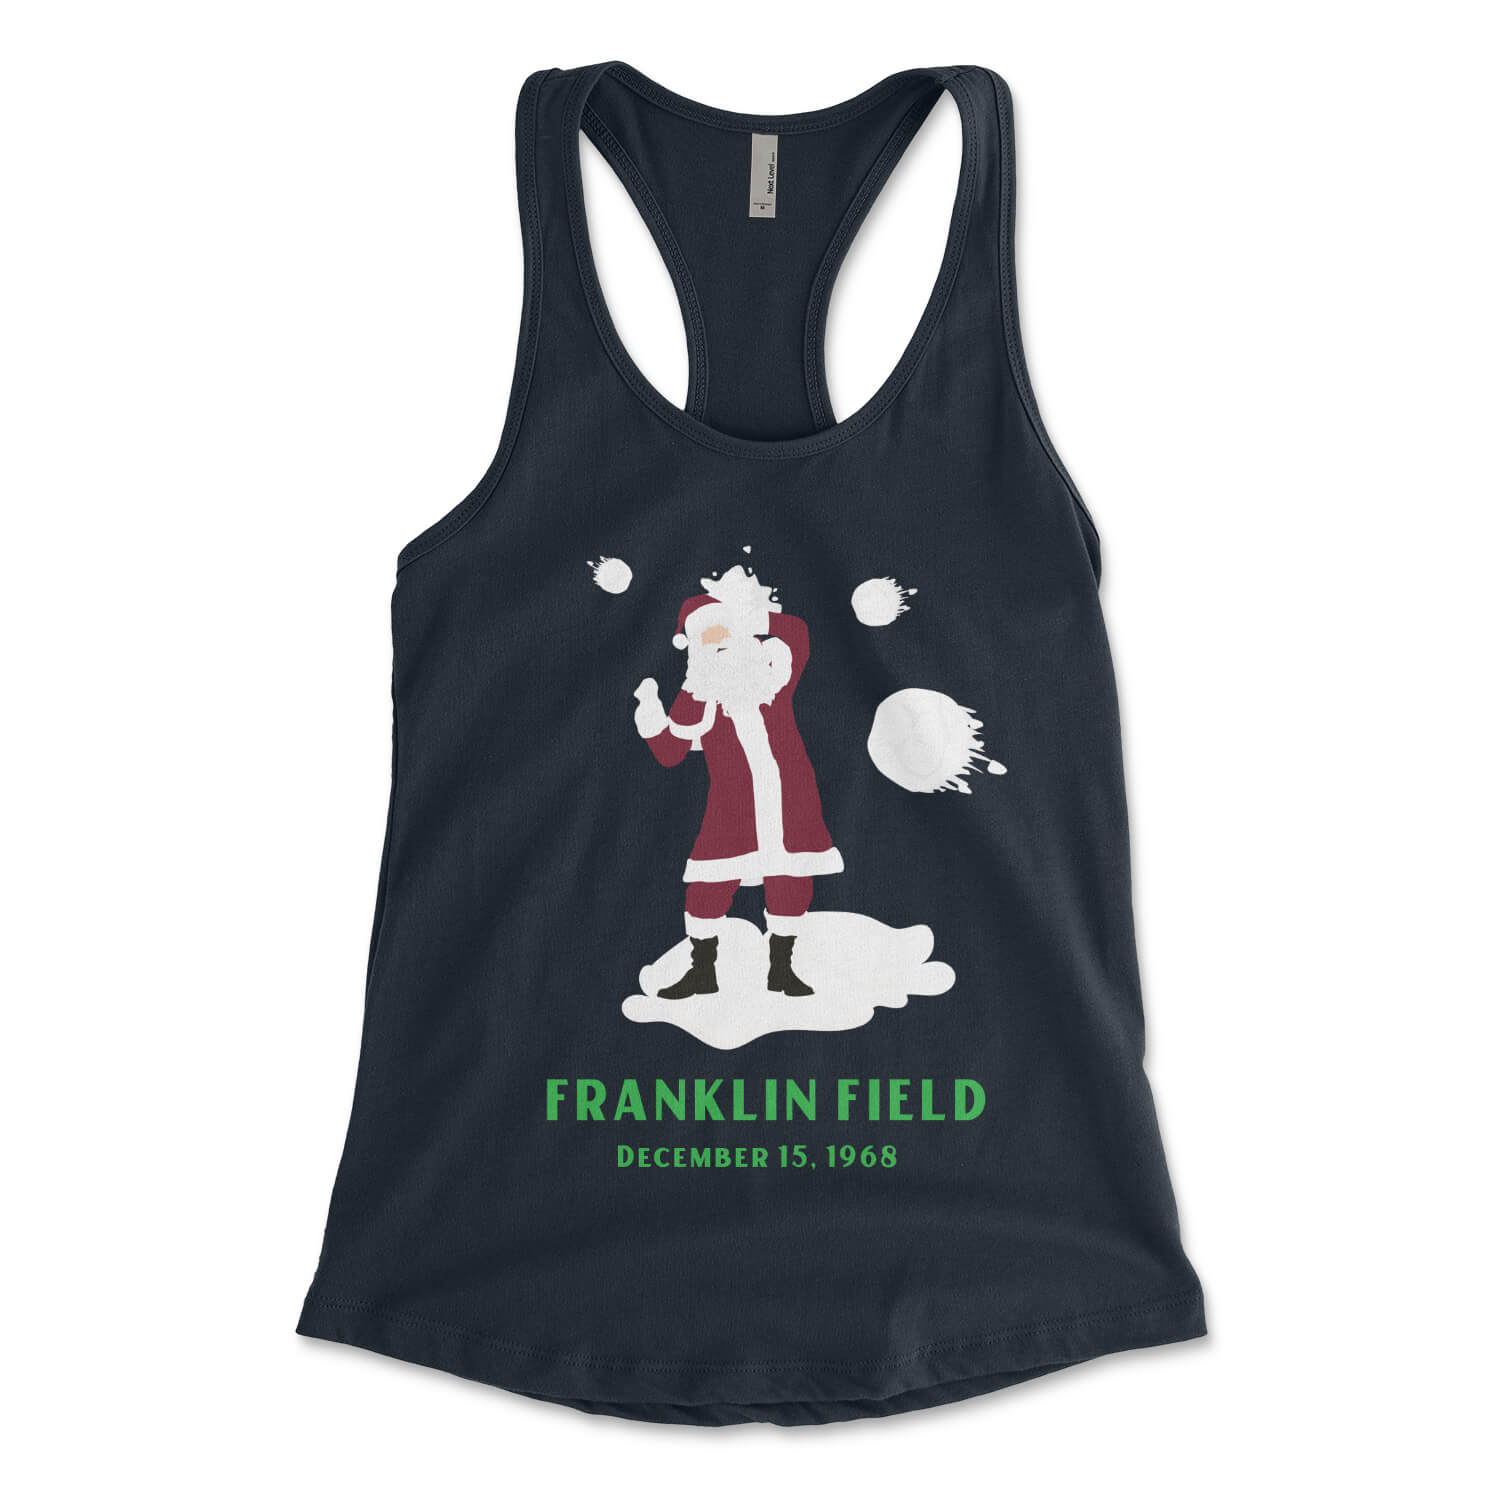 Philadelphia Eagles fans boo Santa Clause at Franklin Field midnight navy blue womens racerback tank top from Phillygoat